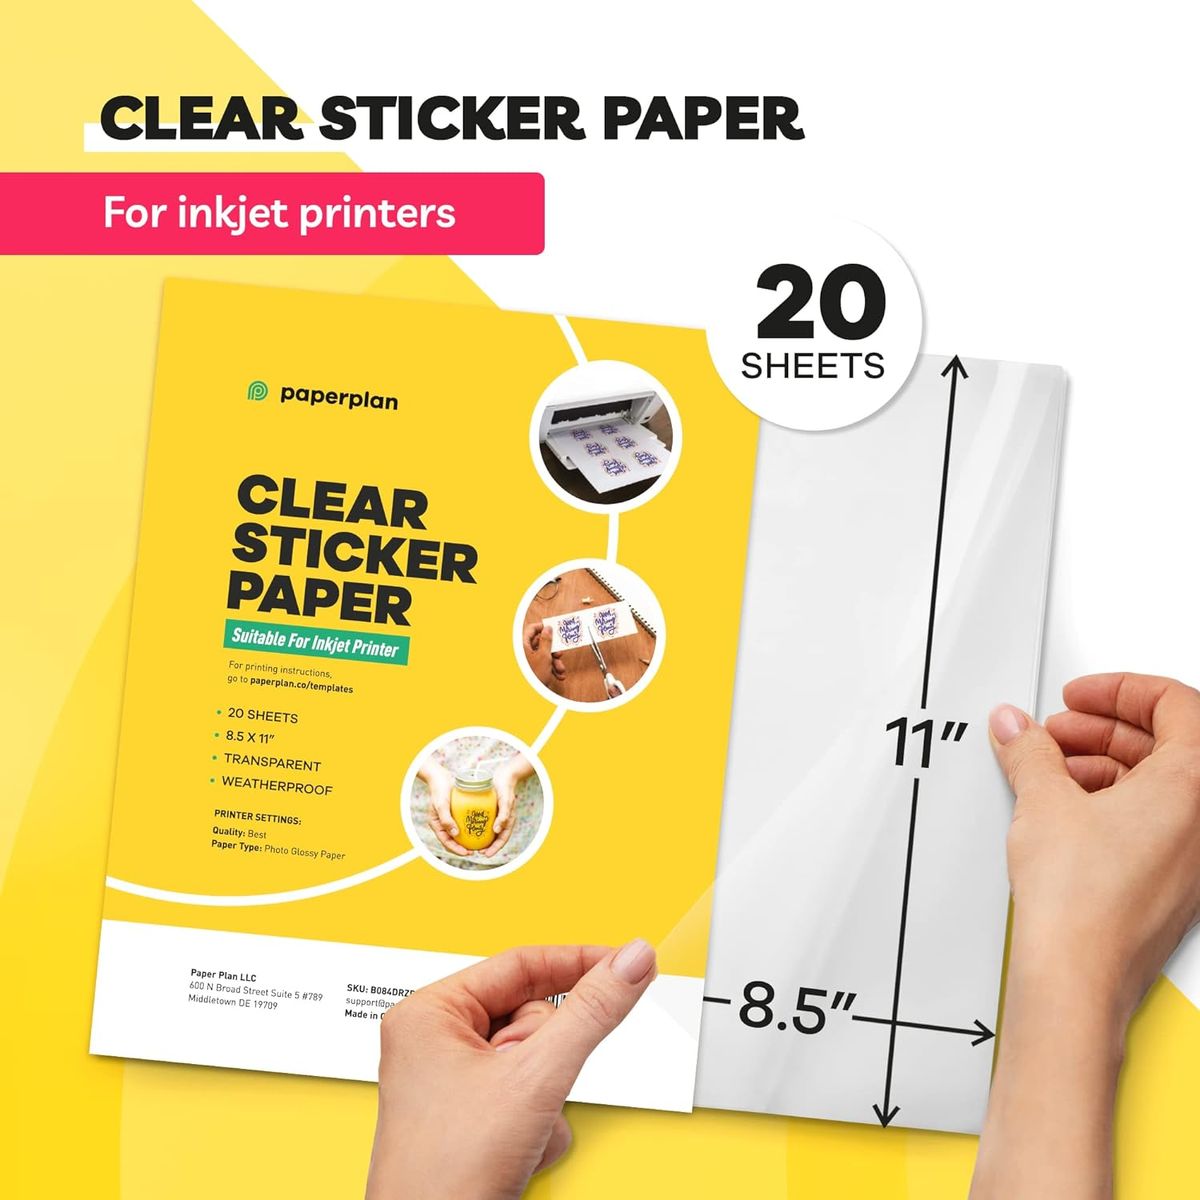 90% Clear Sticker Paper for Inkjet Printer (20 Sheets) - Transparent Glossy  8.5 x 11 - Printable Vinyl - Clear Sticker Paper - Clear Vinyl Sticker